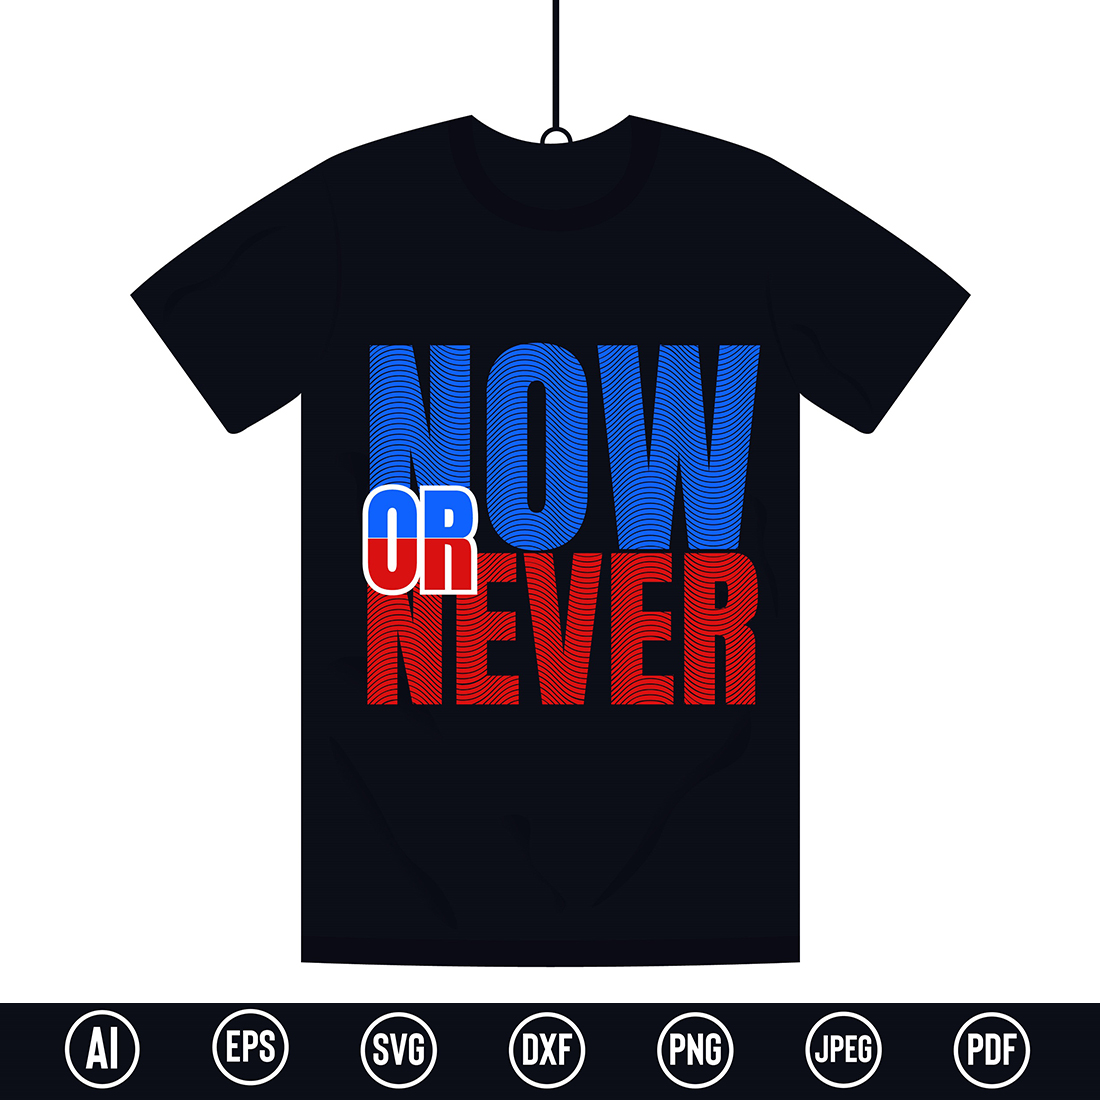 Modern and Inspirational T-Shirt design with “Now or Never” quote for t-shirt, posters, stickers, mug prints, banners, gift cards, labels etc cover image.